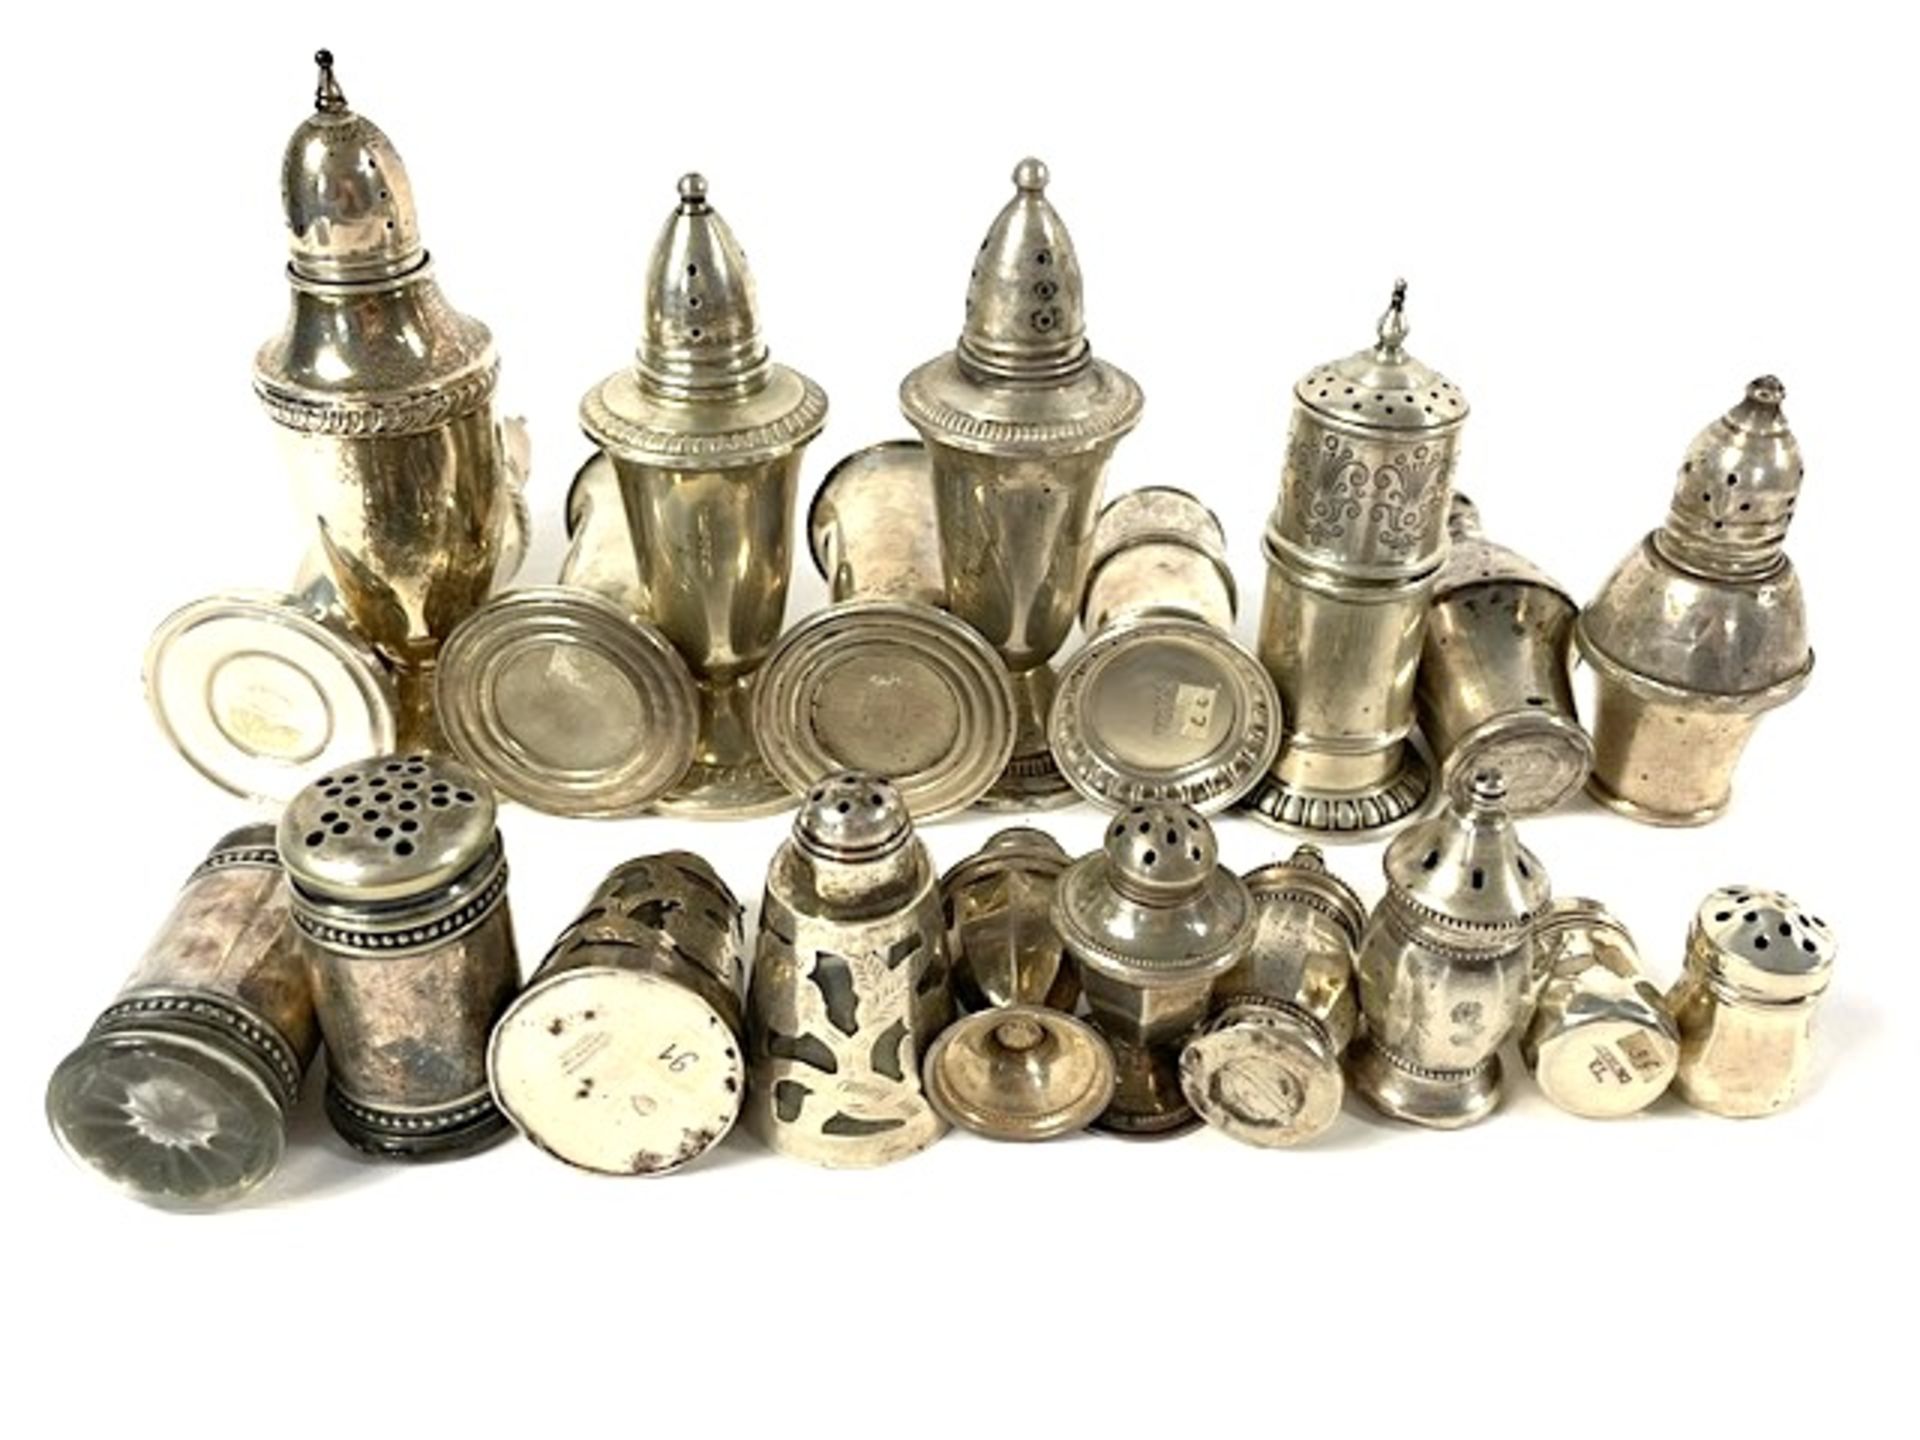 40 pairs of salt/pepper and spice shakers, - Image 86 of 88